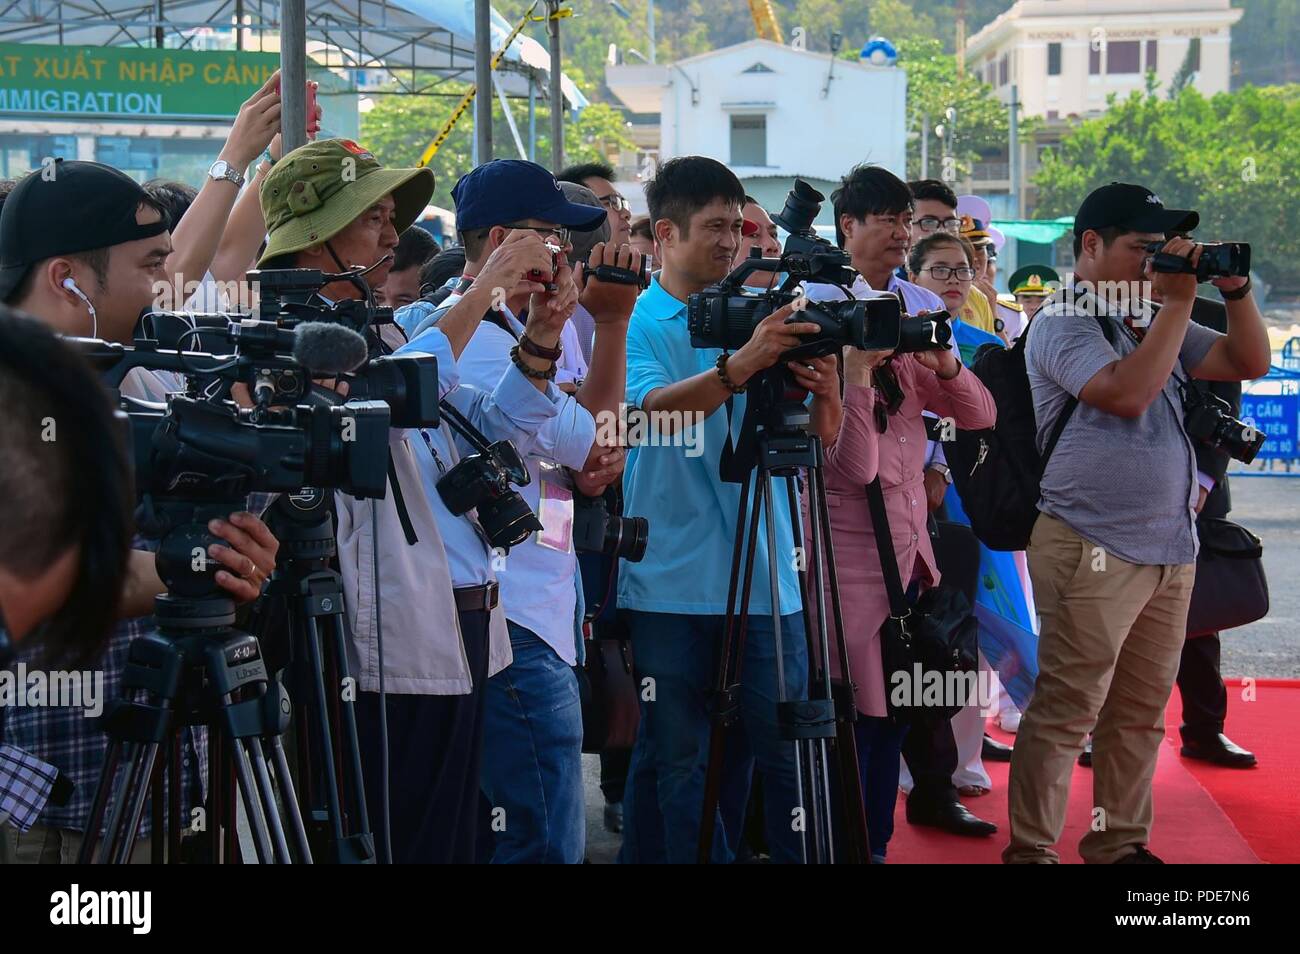 NHA TRANG, Vietnam (May 17, 2018) Members of the media gather for a press conference after the opening ceremony for Pacific Partnership 2018 (PP18). PP18’s mission is to work collectively with host and partner nations to enhance regional interoperability and disaster response capabilities, increase stability and security in the region, and foster new and enduring friendships across the Indo-Pacific Region. Pacific Partnership, now in its 13th iteration, is the largest annual multinational humanitarian assistance and disaster relief preparedness mission conducted in the Indo-Pacific. Stock Photo